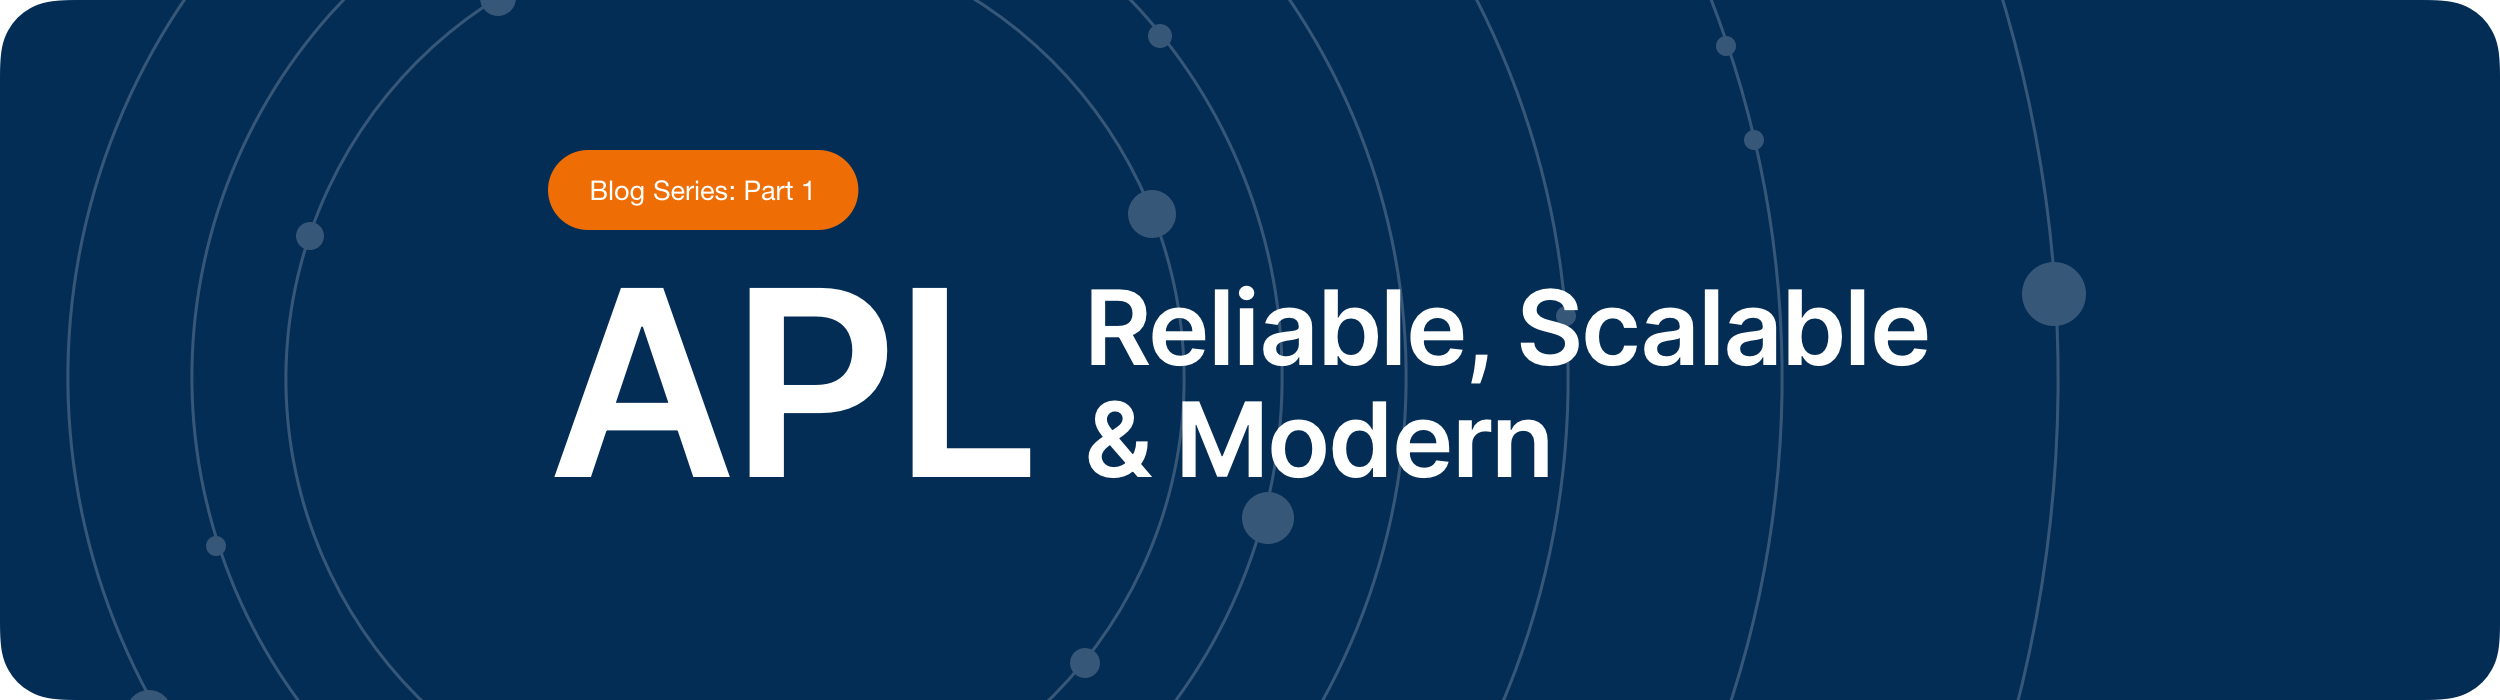 Reliable, scalable & modern